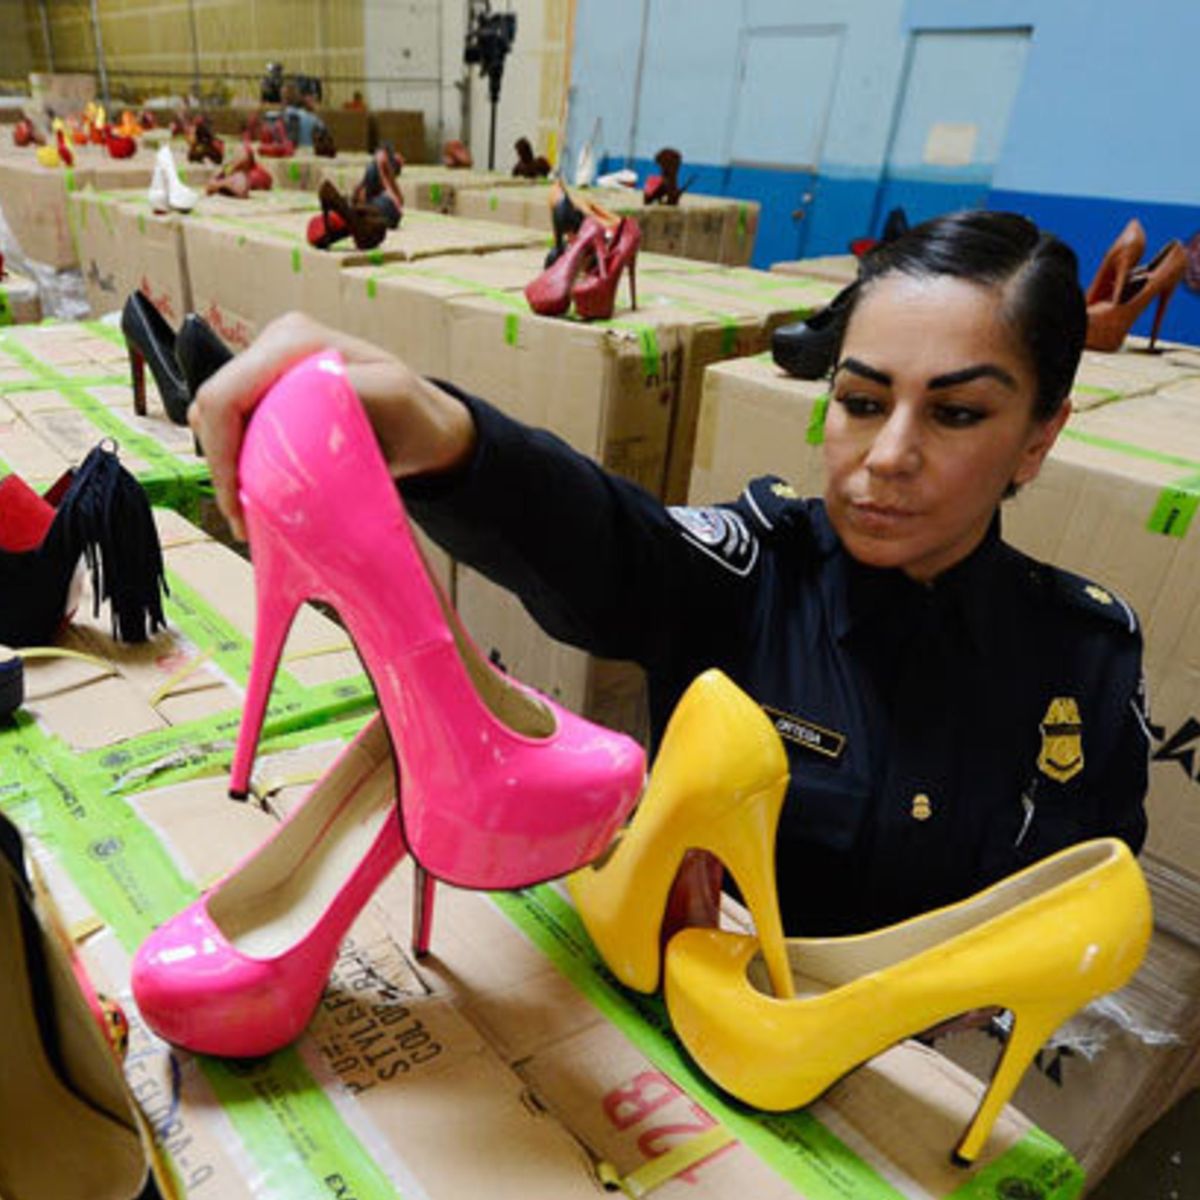 Fake 'red sole' shoes seized at Los Angeles port